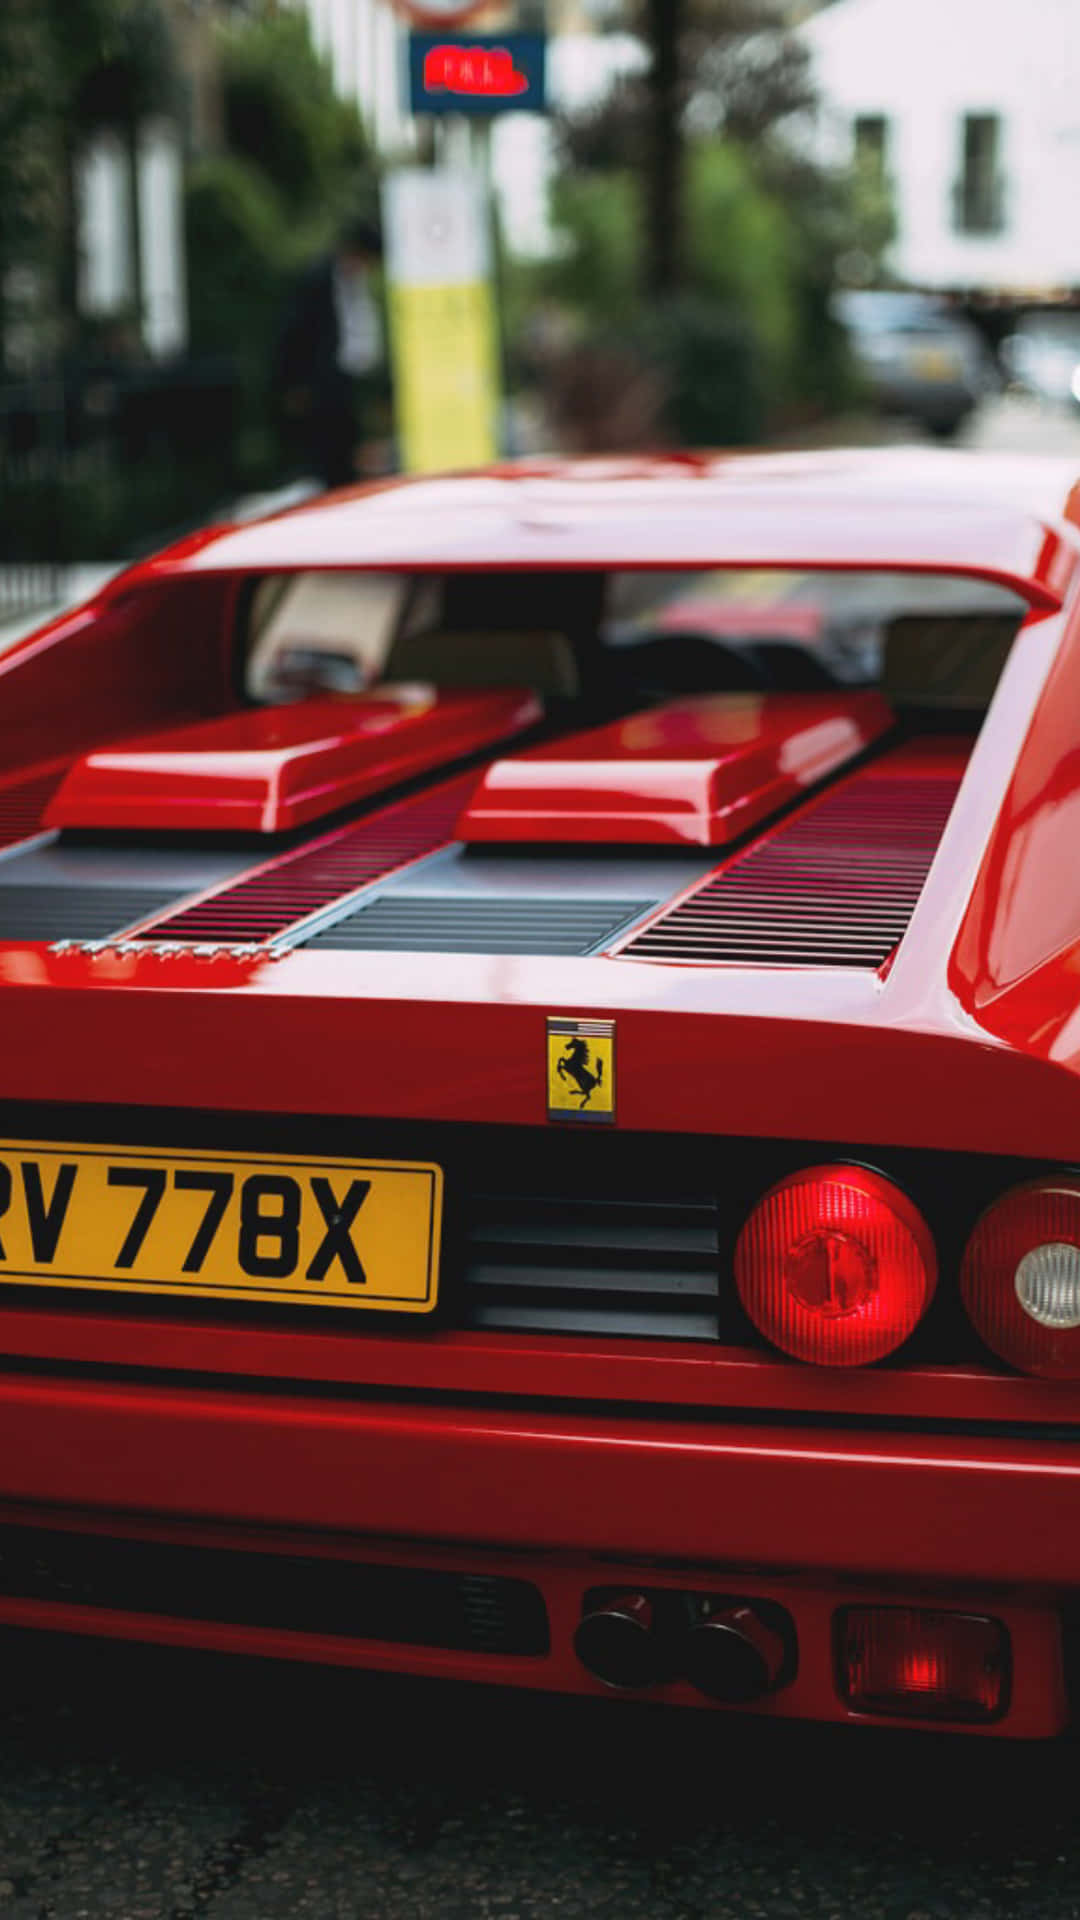 "The epitome of luxury and vintage style: the classic Ferrari". Wallpaper